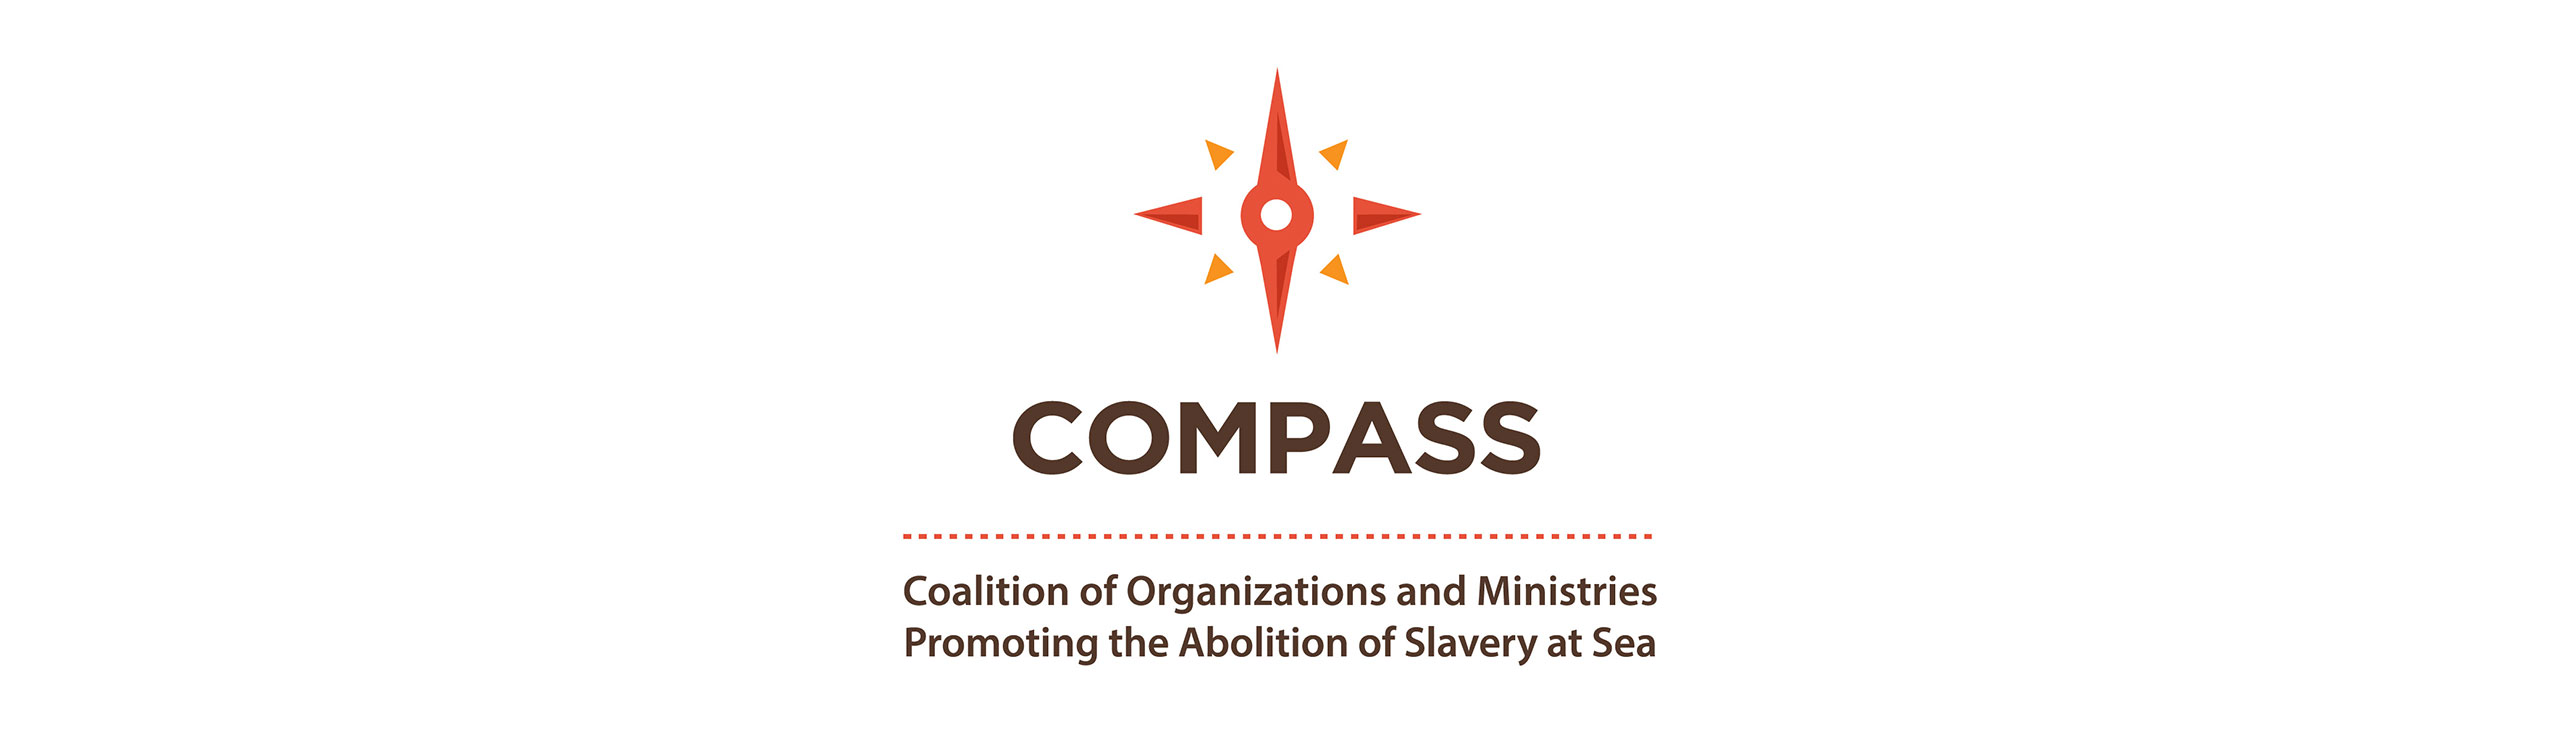 Compas-Coalition-of-Orginizations-and-Ministries-Protecting-Migrant-Populations-from-Forced-Labor-at-Sea